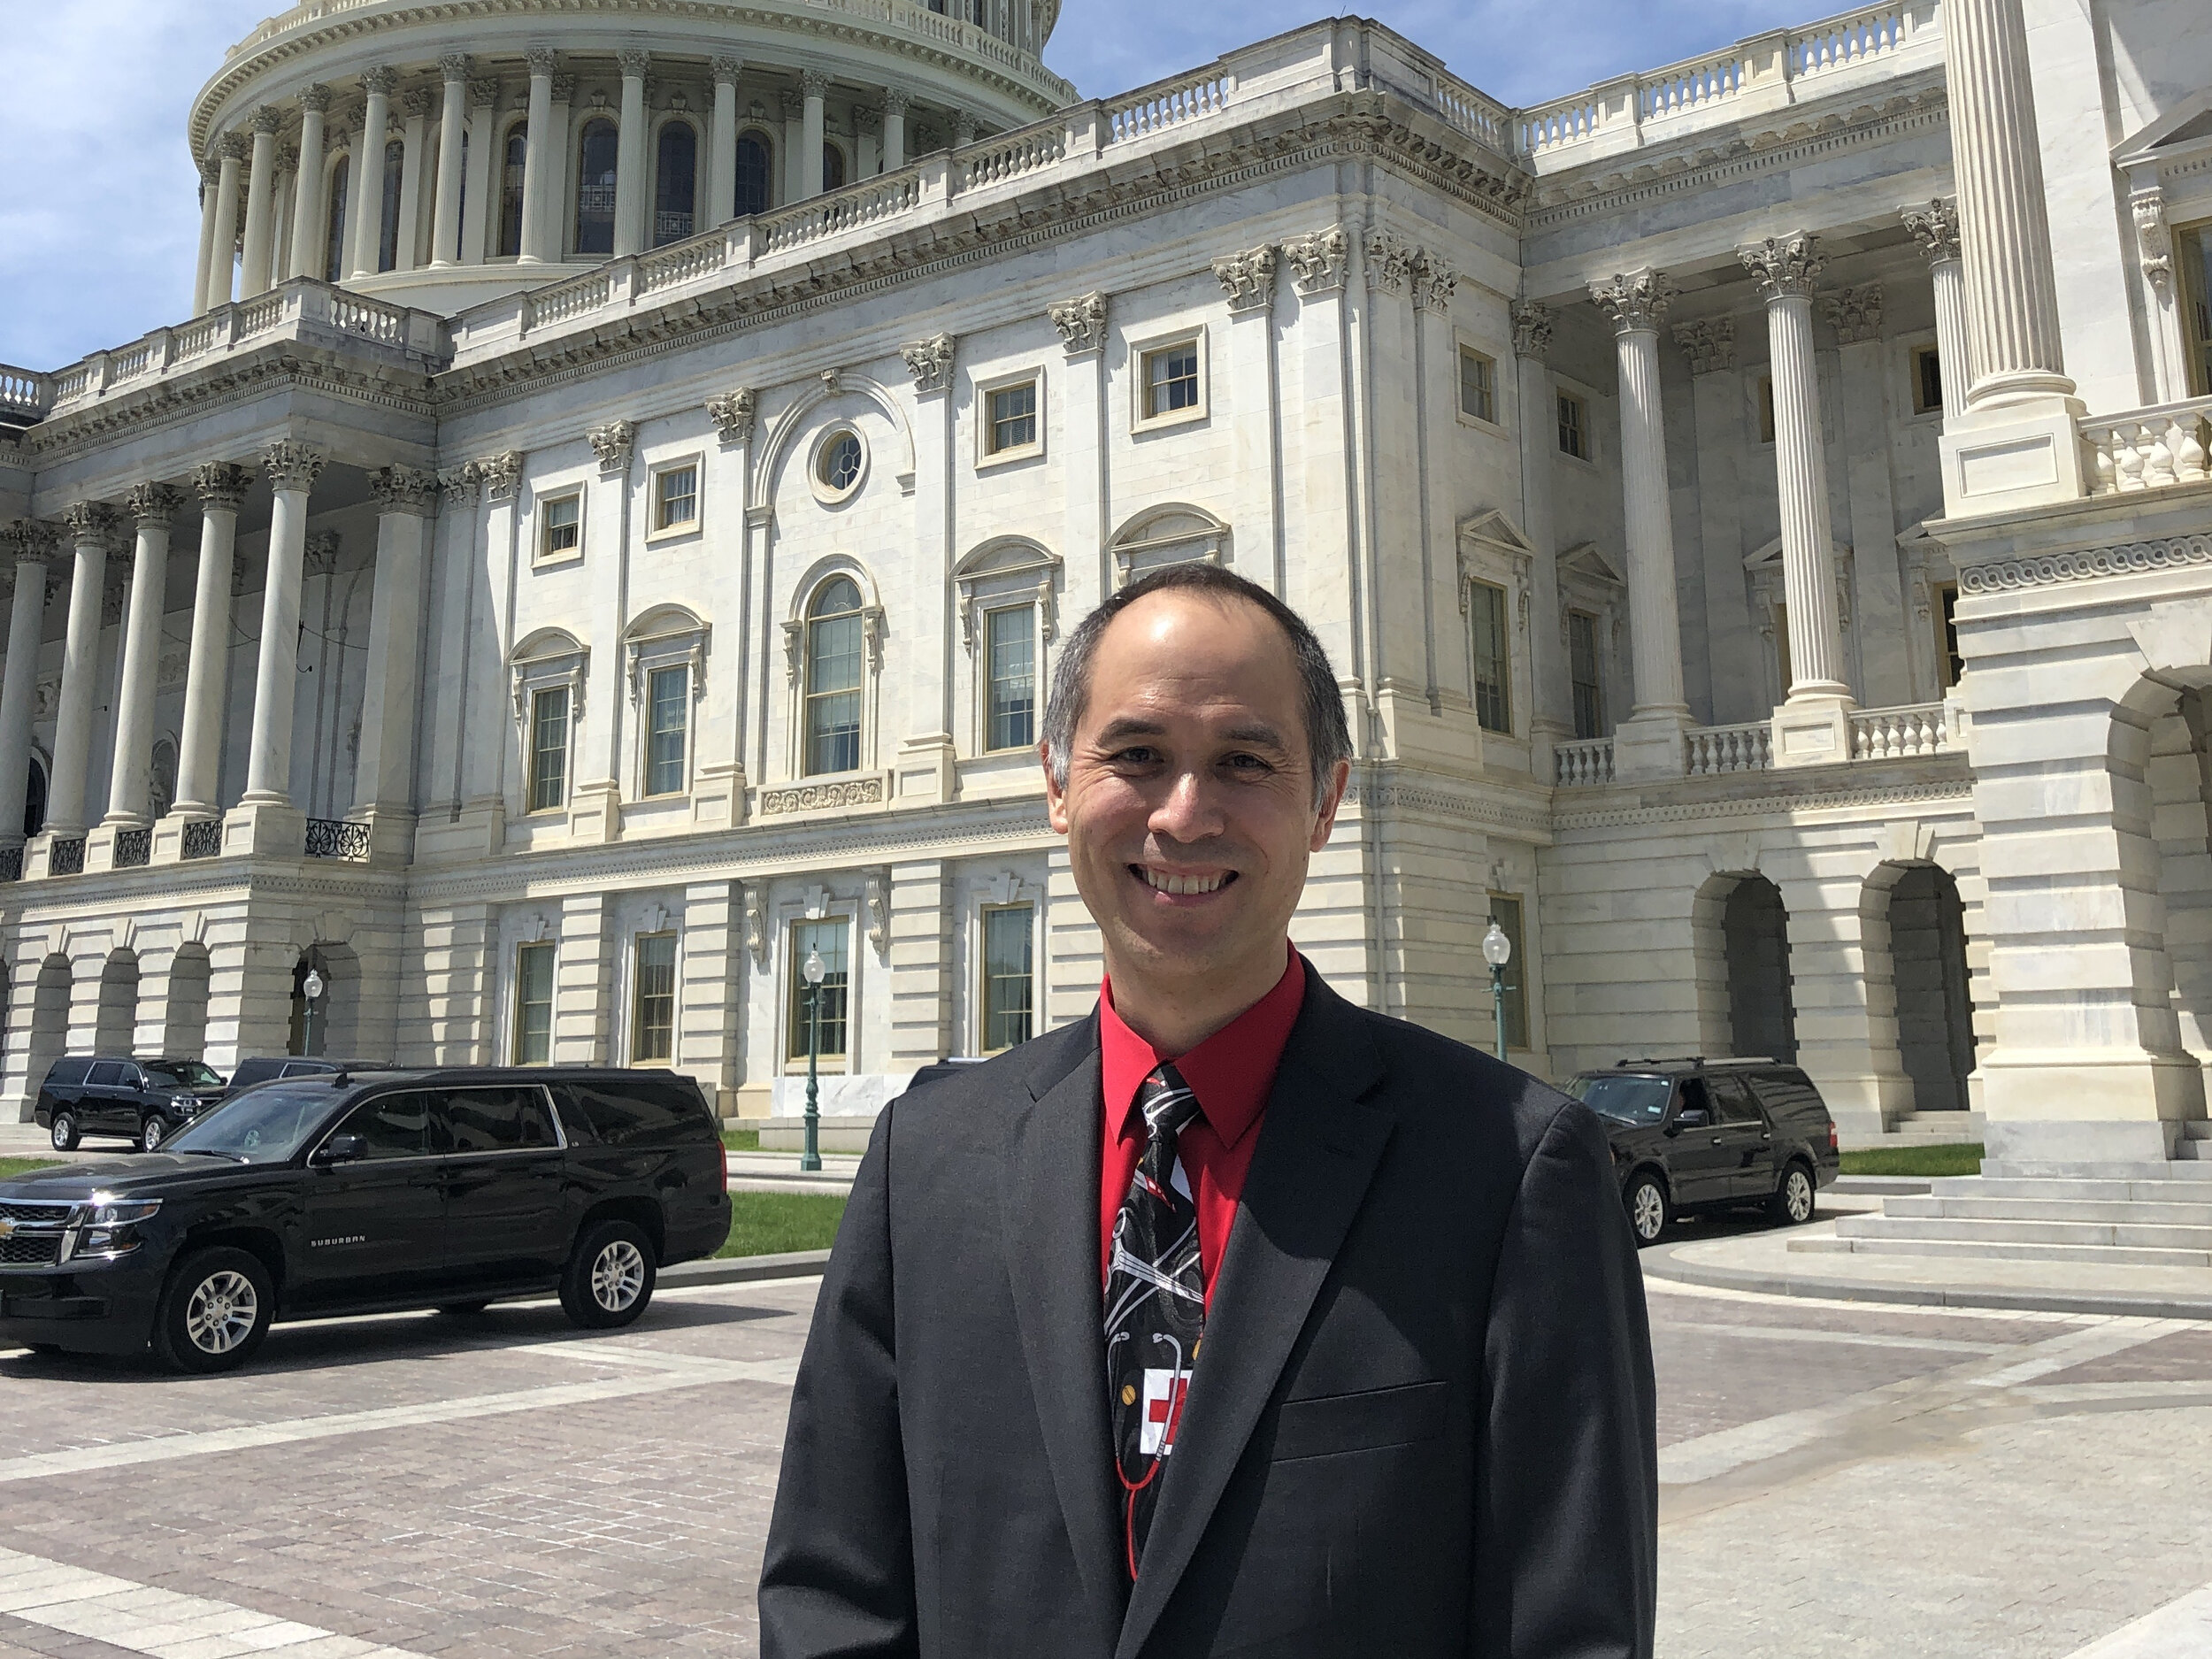 Dr. Carroll on Capitol Hill